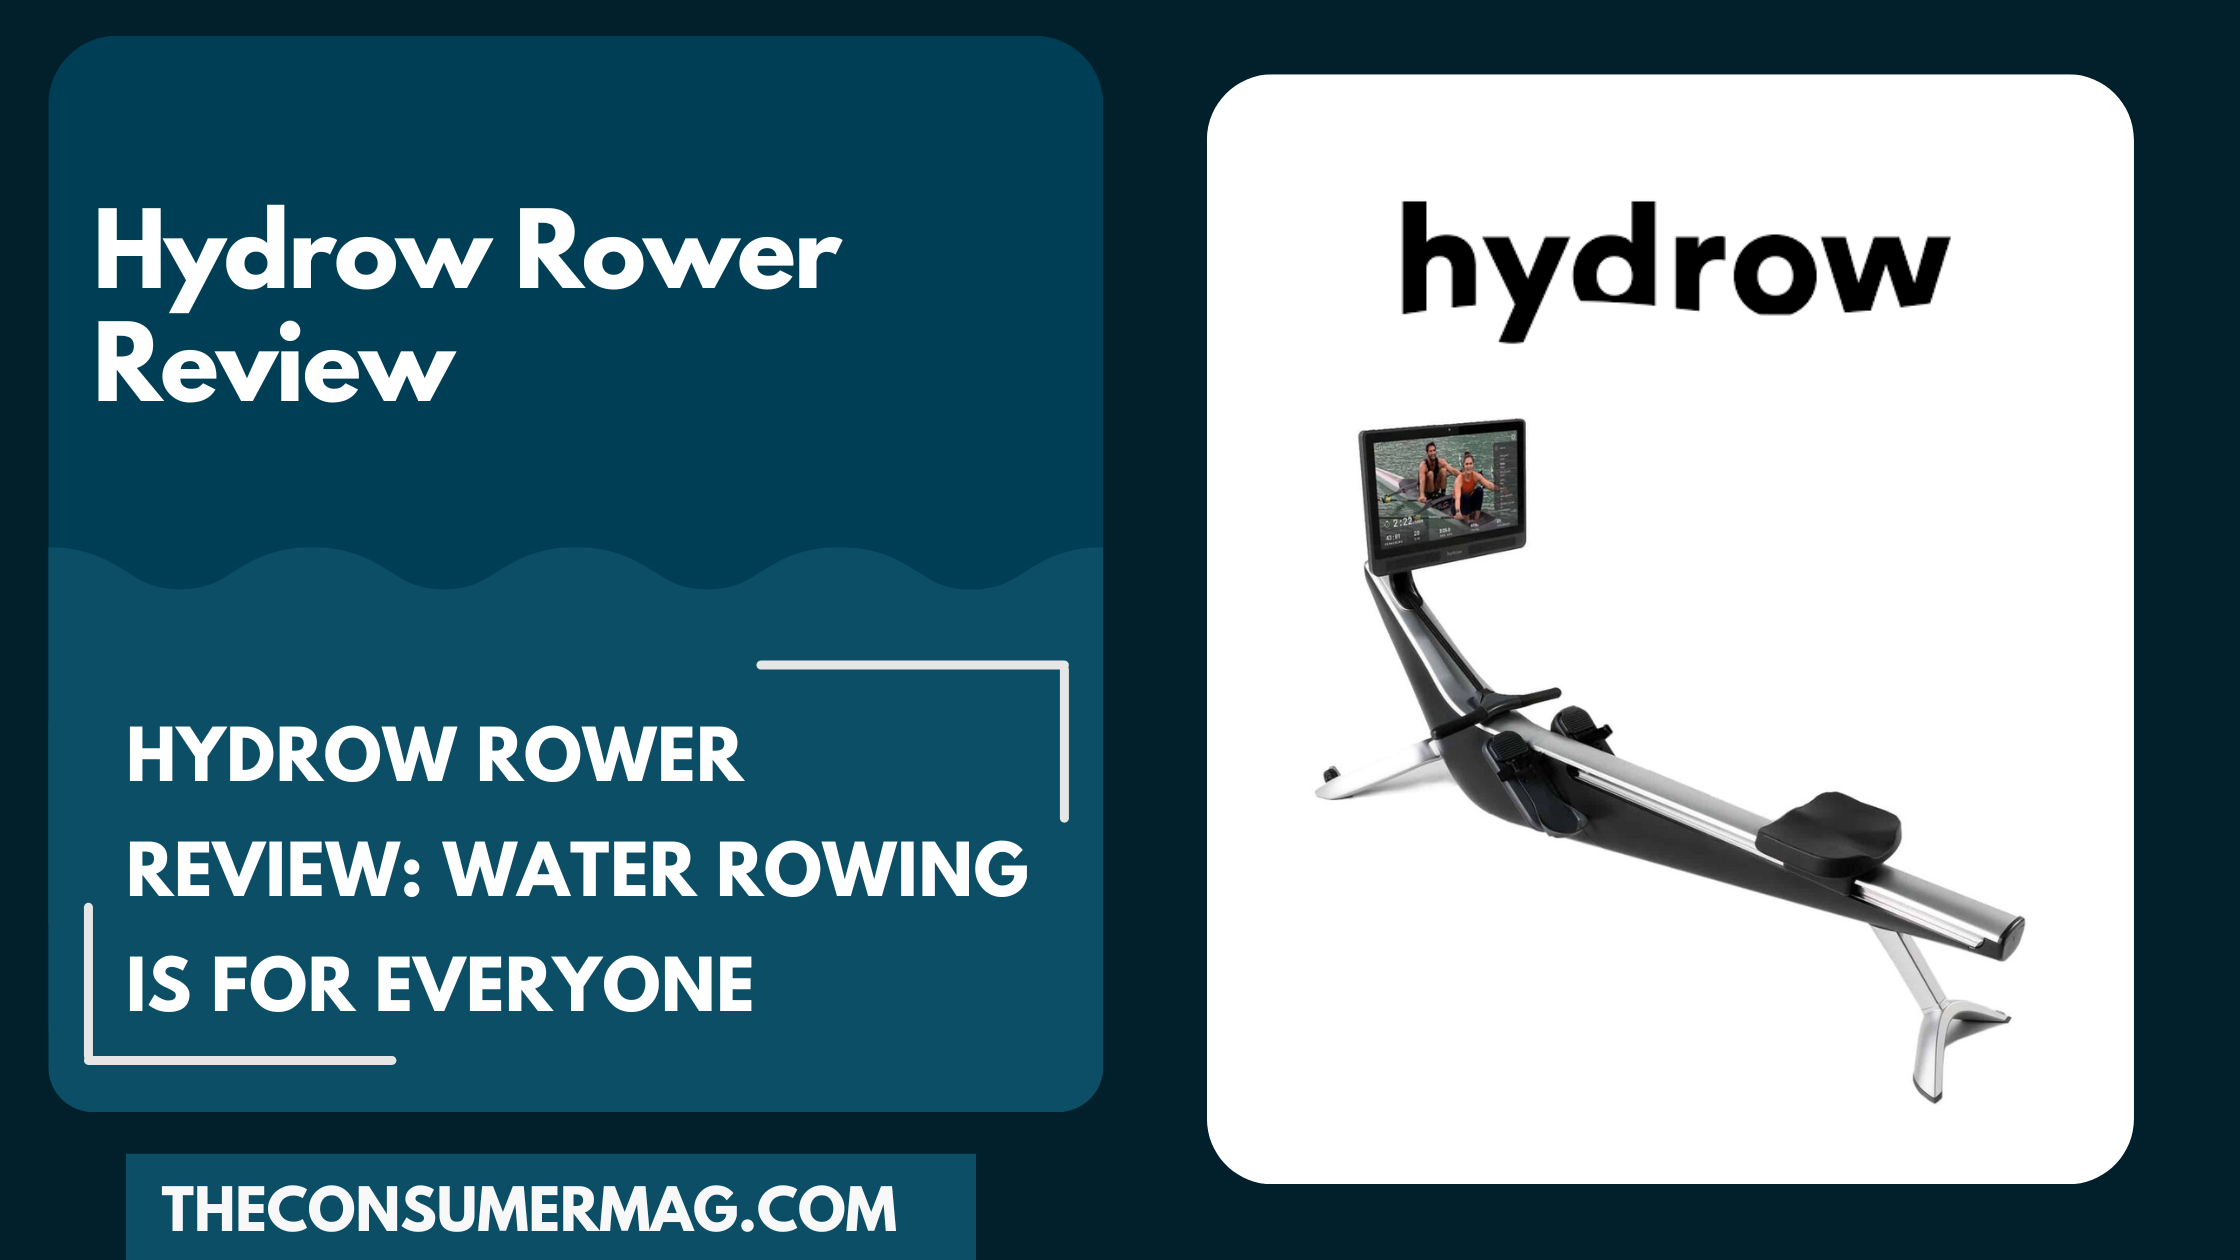 Hydrow Rower featured image